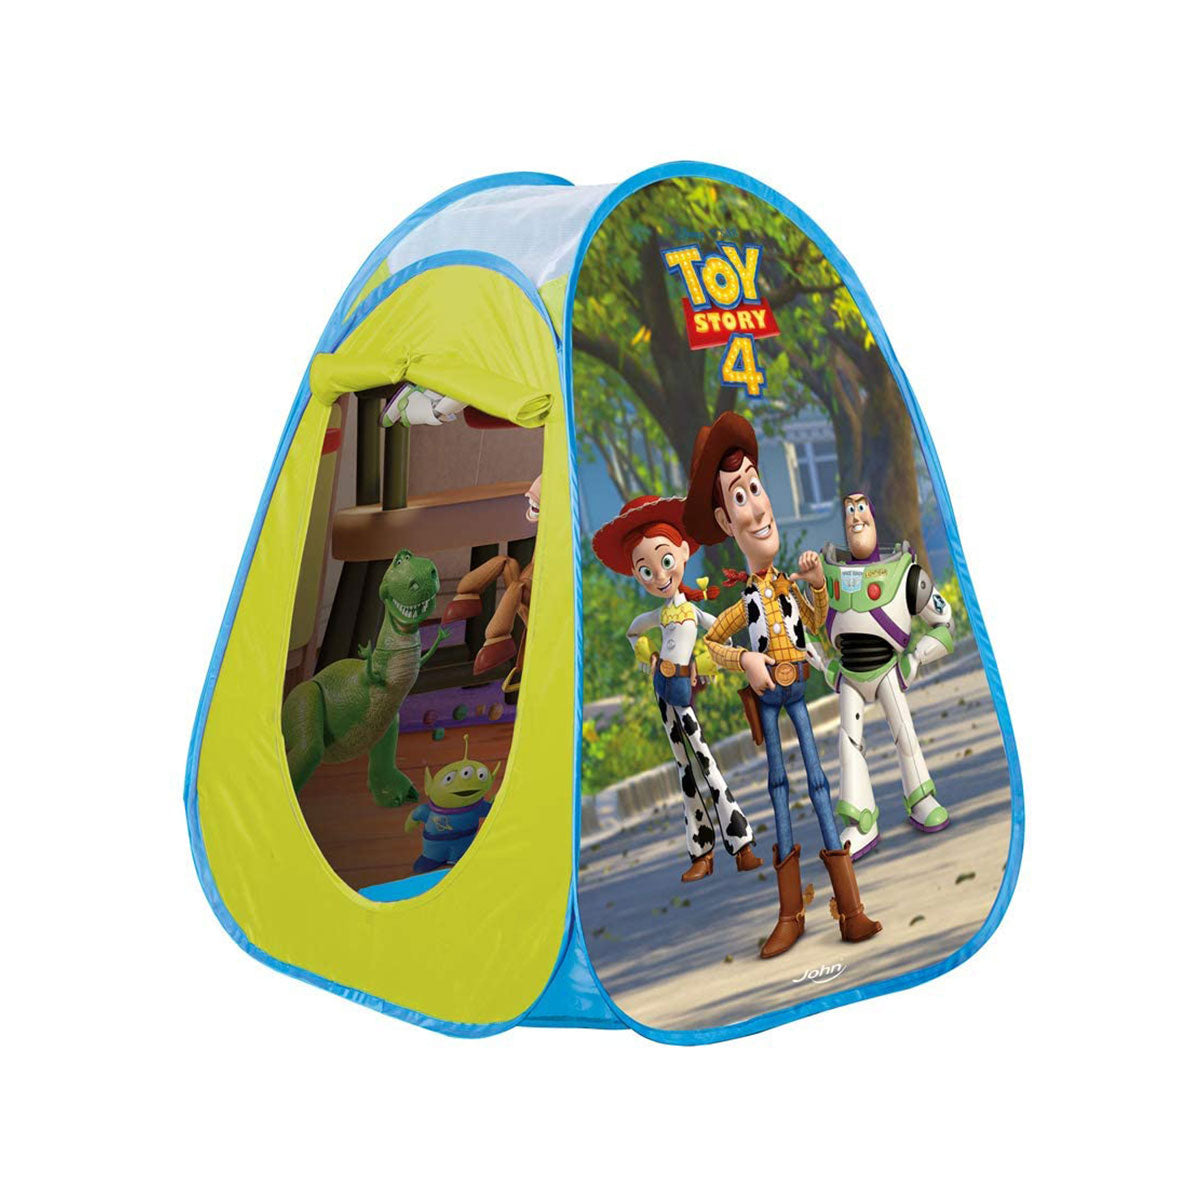 Toy Story 4 Pop Up Play Tent